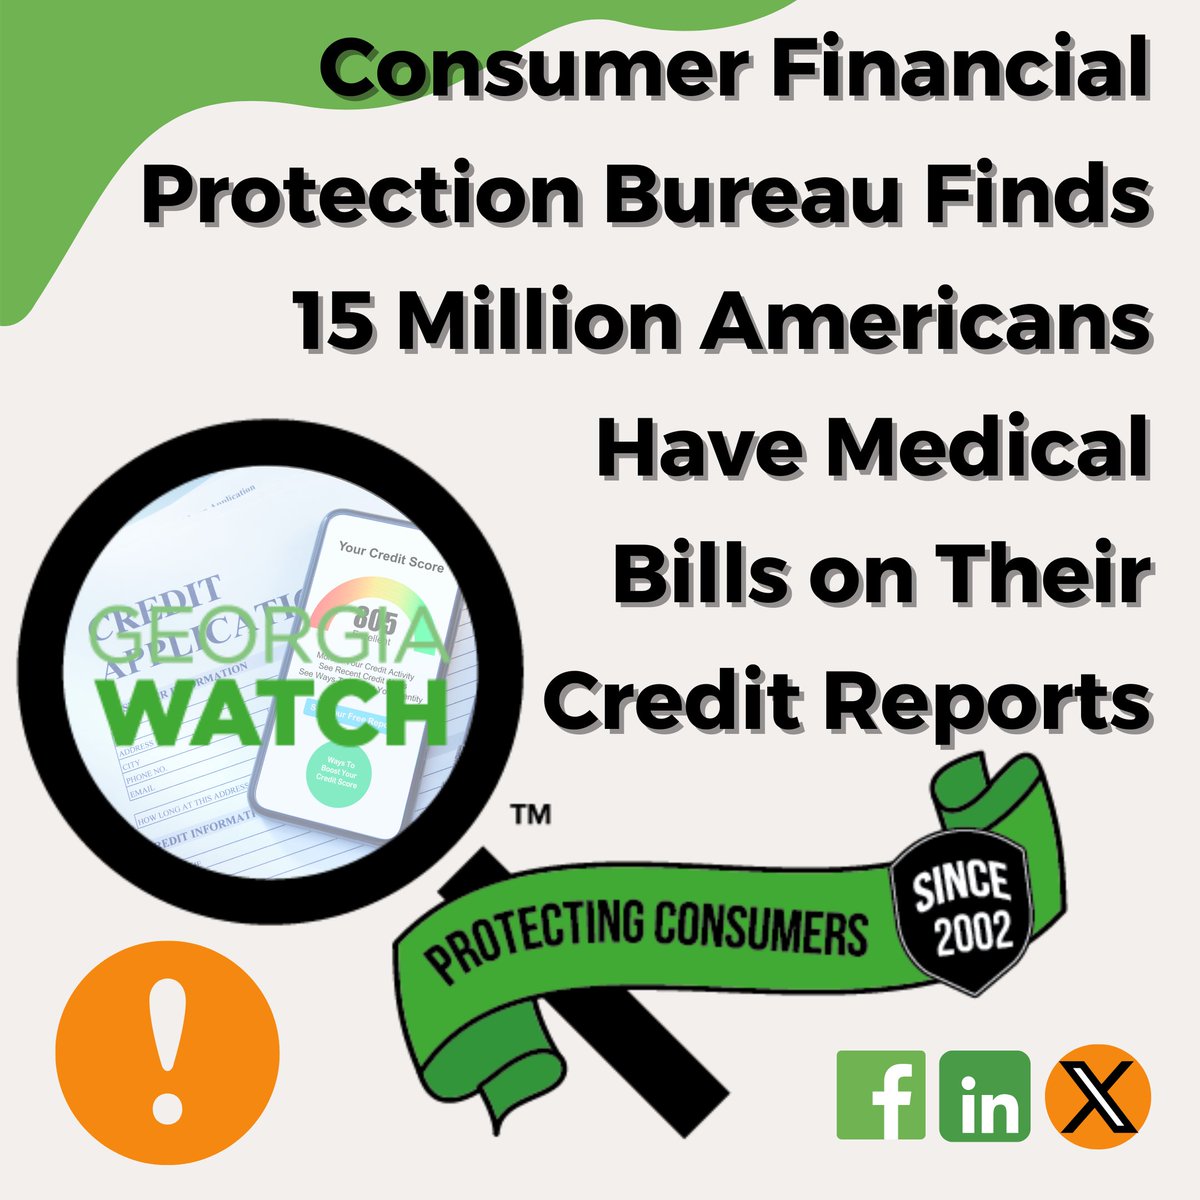 The Consumer Financial Protection Bureau (CFPB) released research showing that 15 million Americans, mainly within the South and low-income communities, have medical bills on their credit reports despite changes by Equifax, Experian and TransUnion. #CFPB #Medicaldebt